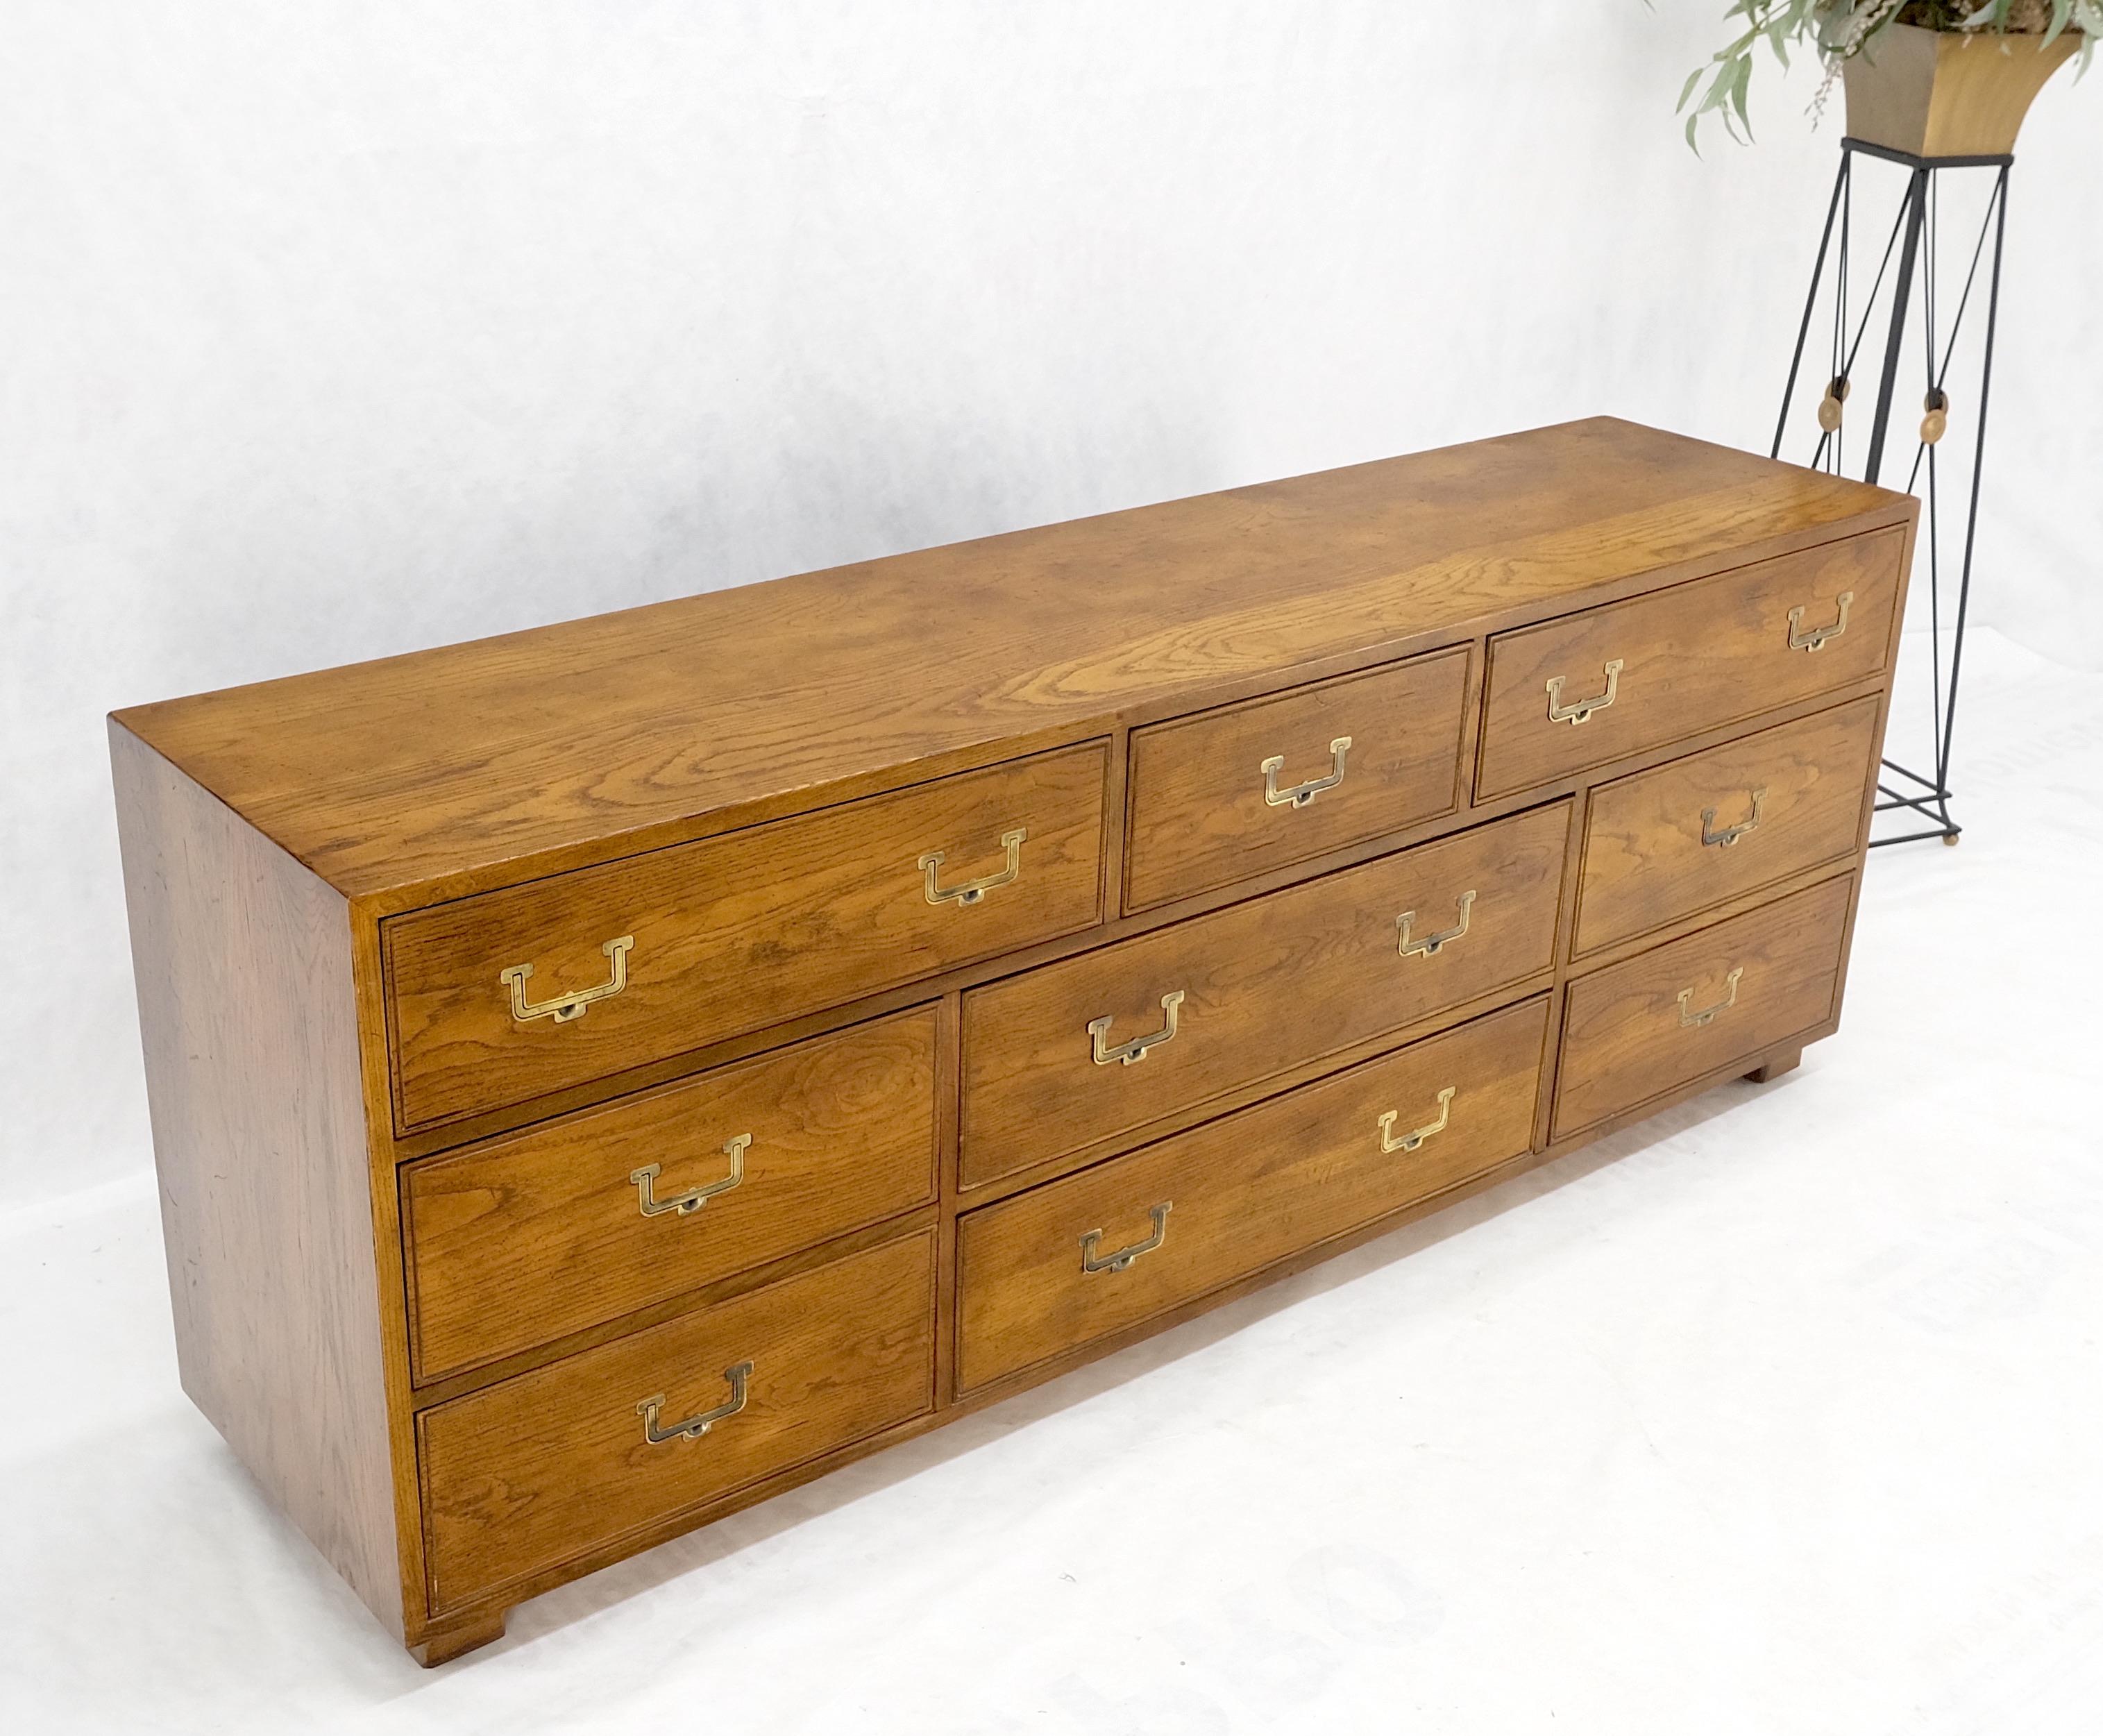 Henredon Campaign Style 9 Drawers Brass Drop Pulls Long Dresser Credenza Mint! In Good Condition For Sale In Rockaway, NJ